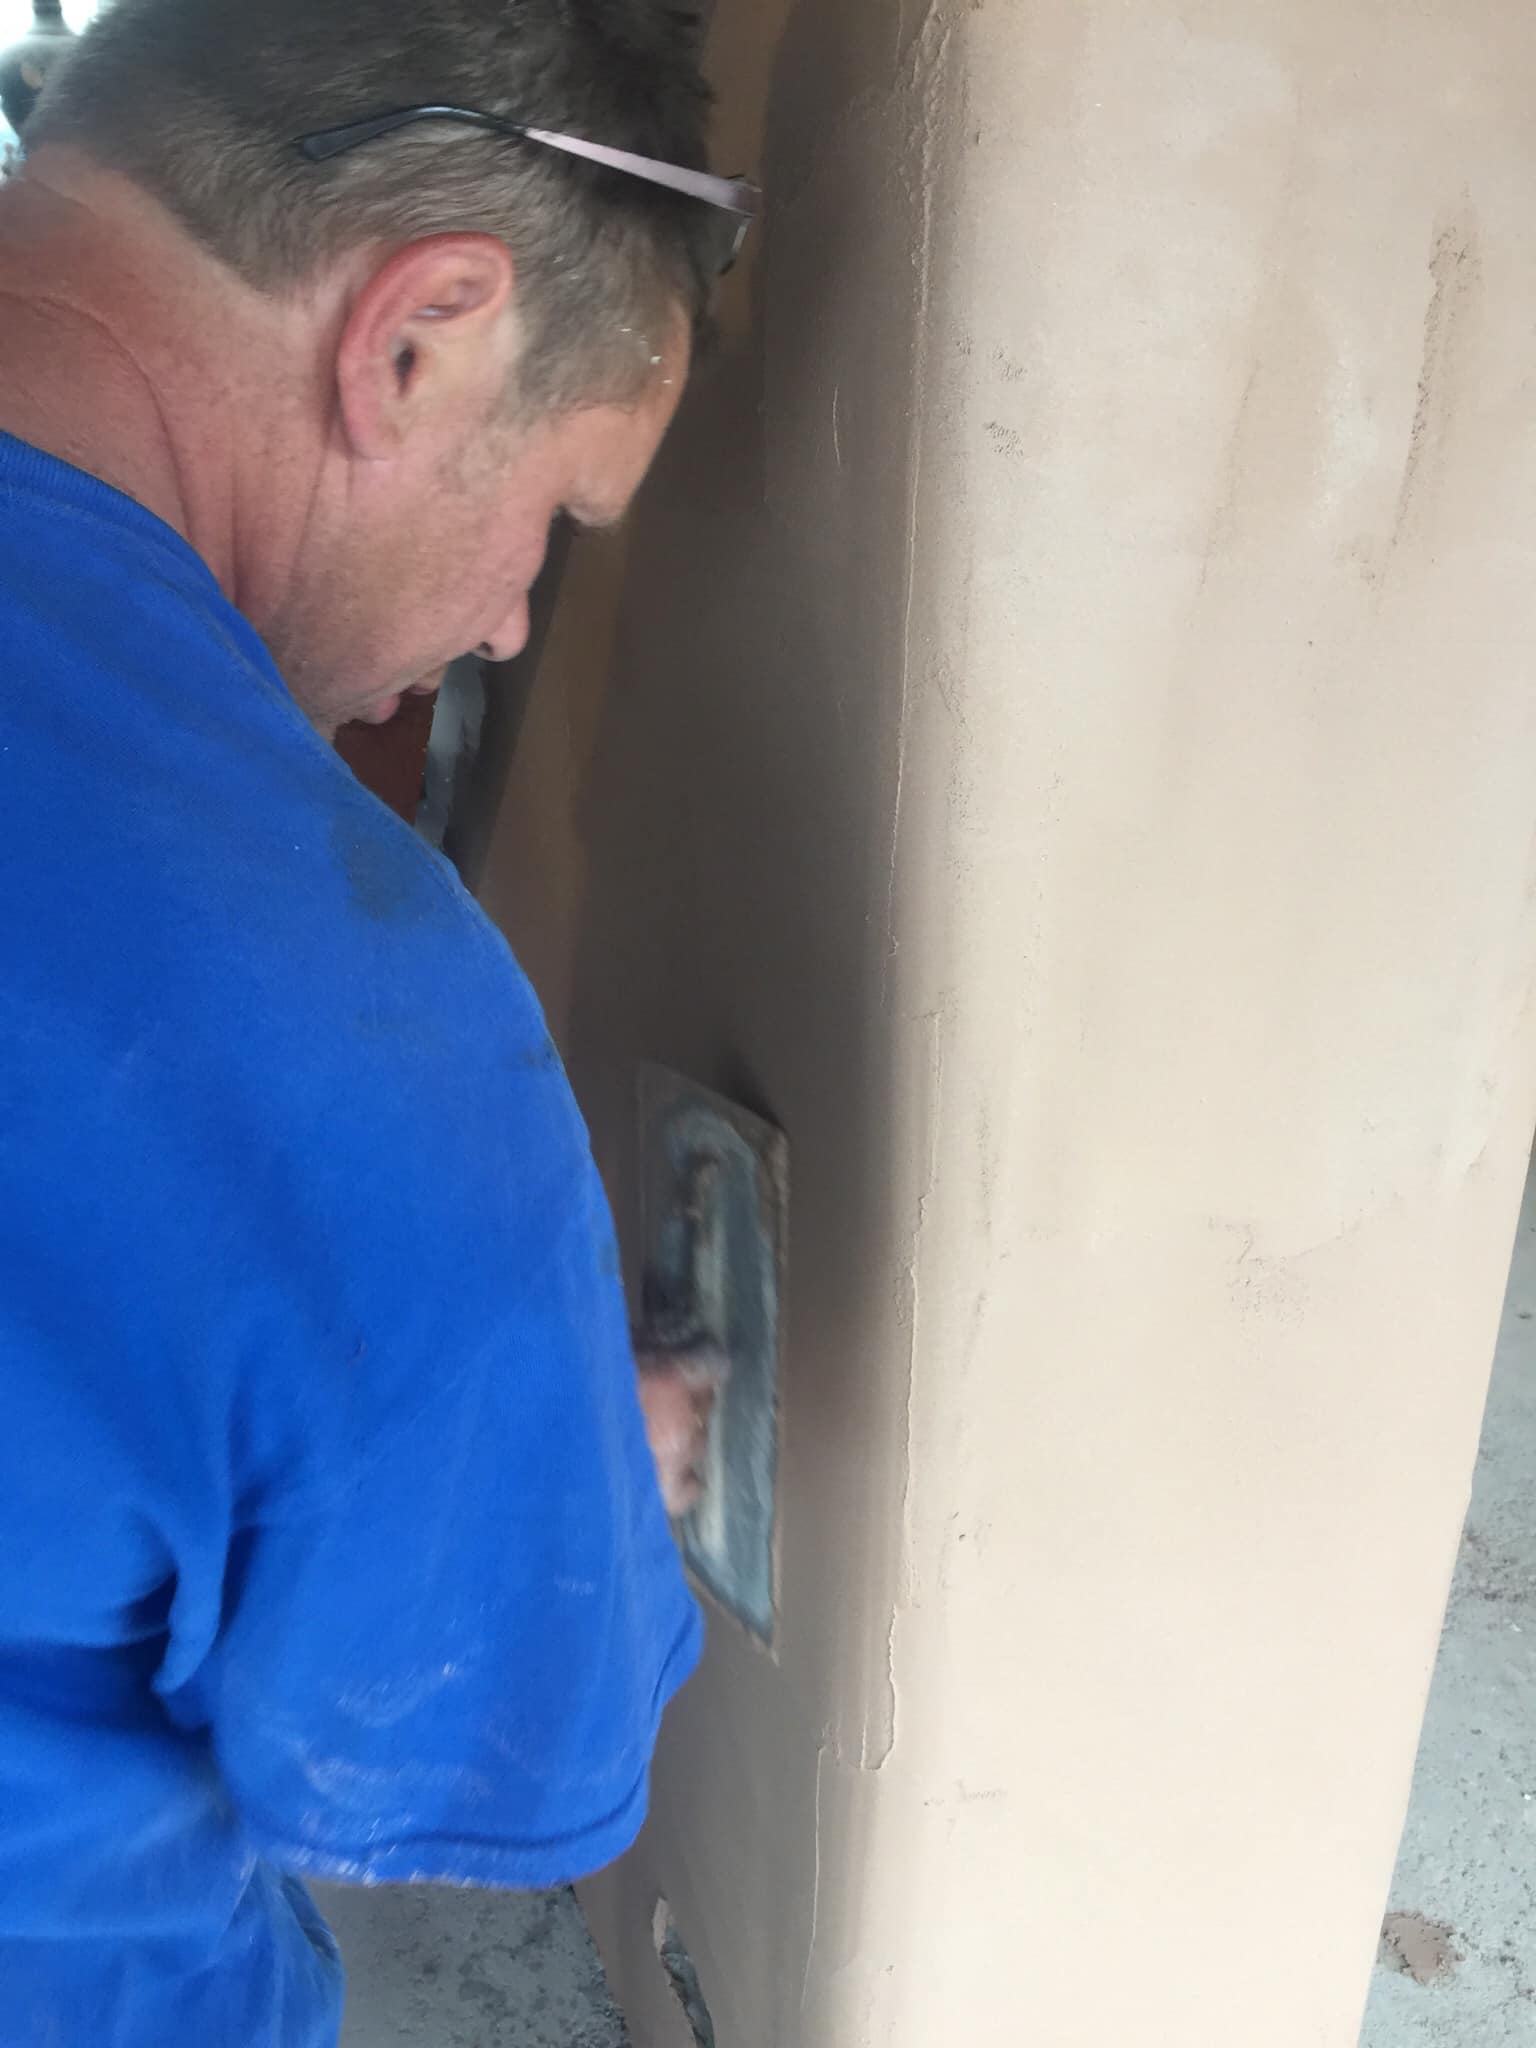 Plasterer In Pentraeth | Plastering Services | External Wall rendering | Decorative Cornice Repairs | Listed Building Renovation | Property Maintenance Services | GW Farrell Plasterers